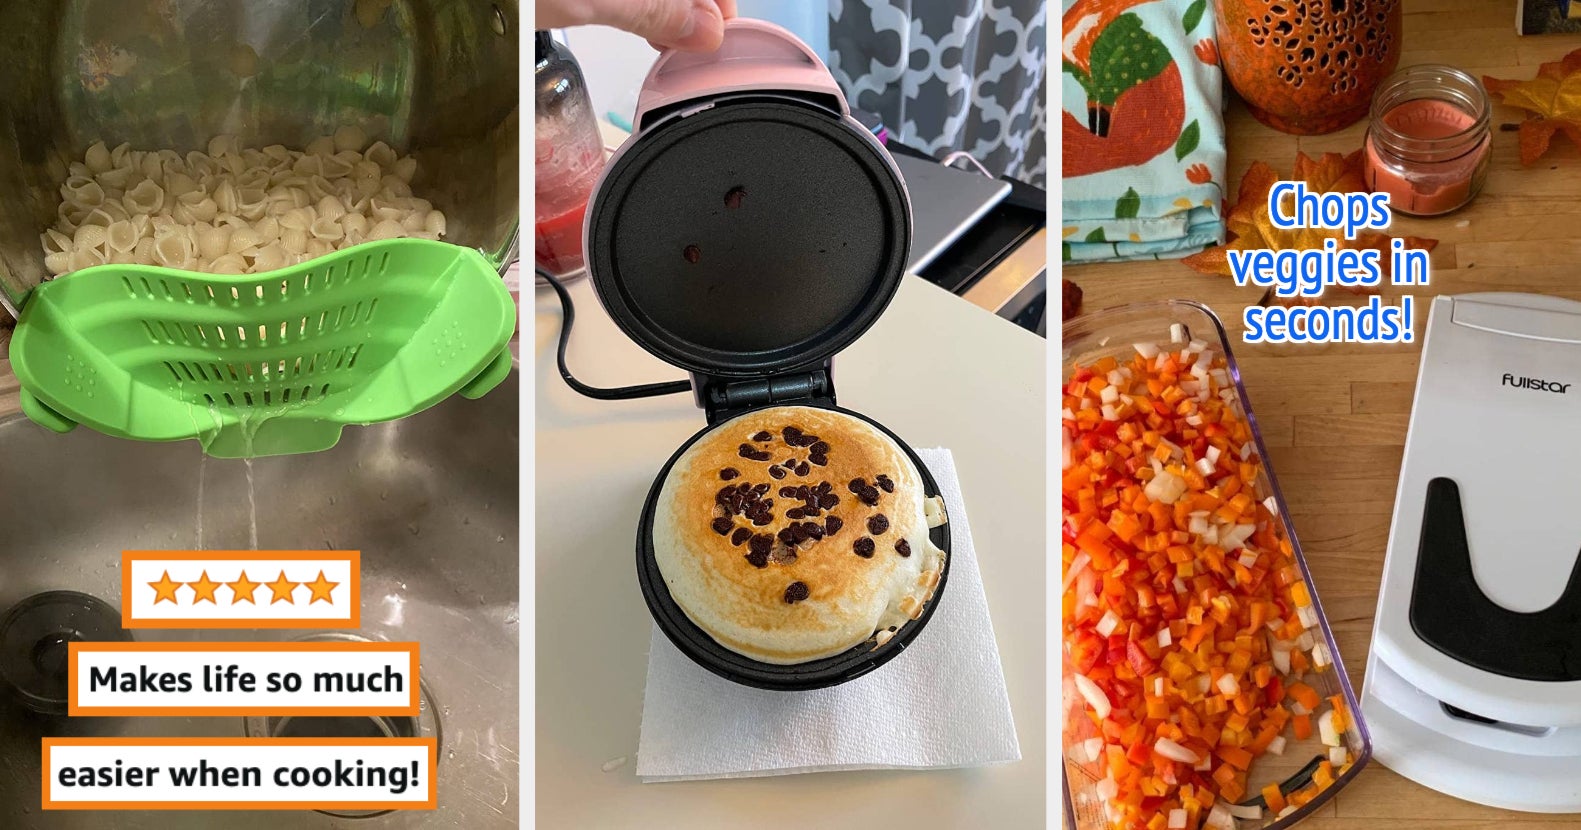 Silicone Baking Cups Make Meal Prep Easy, FN Dish - Behind-the-Scenes,  Food Trends, and Best Recipes : Food Network